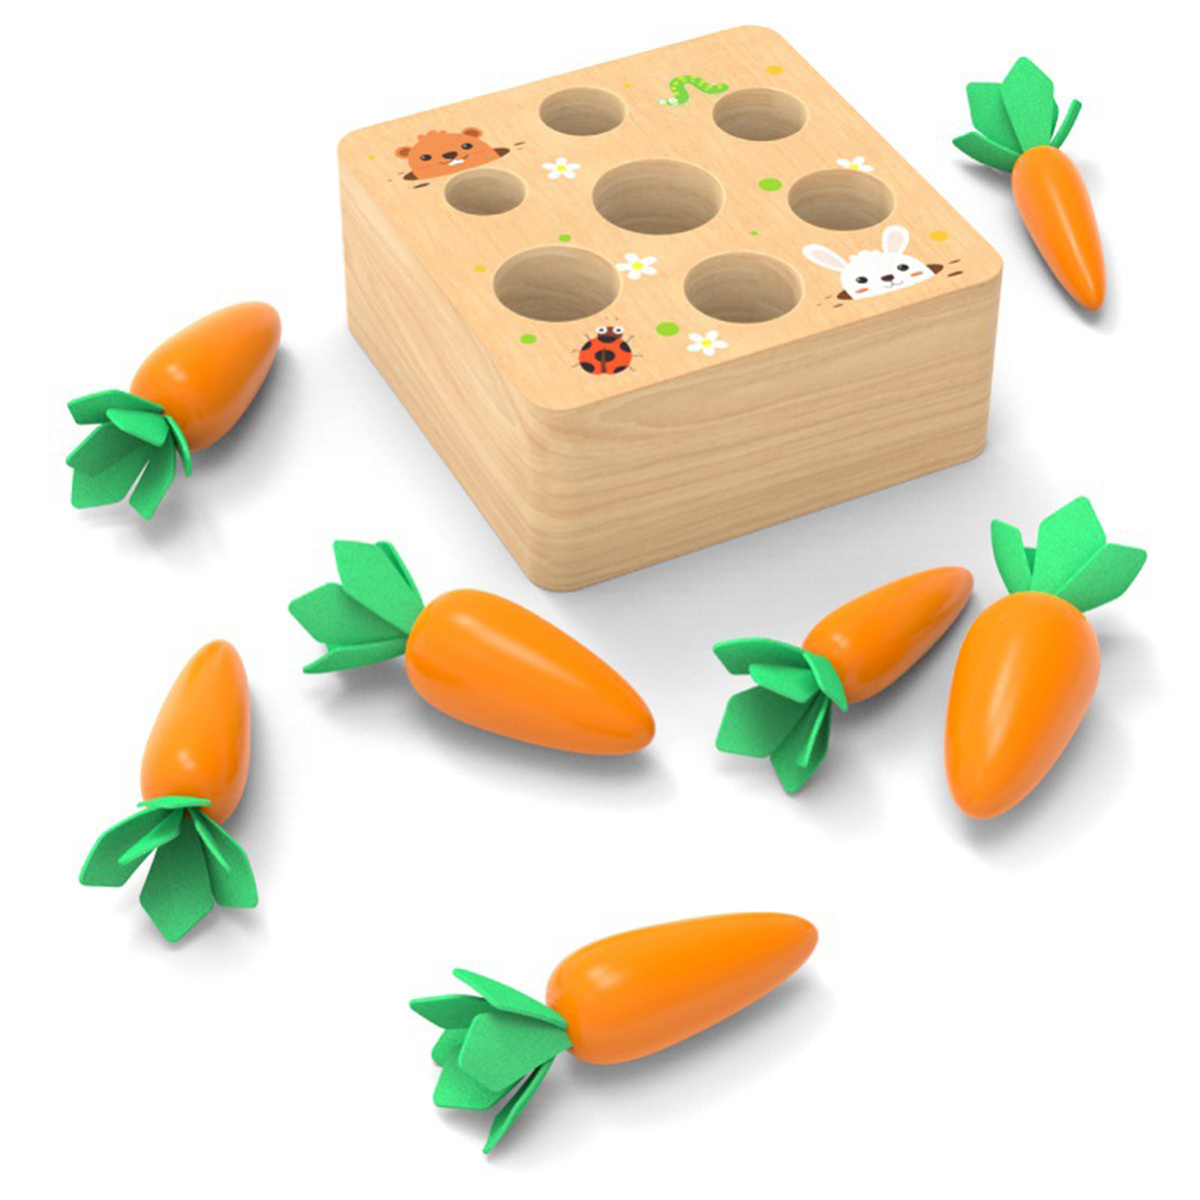 Kids-Wooden-Building-Blocks-Pulling-Carrot-Game-Children-Early-Educational-Toys-1676982-3